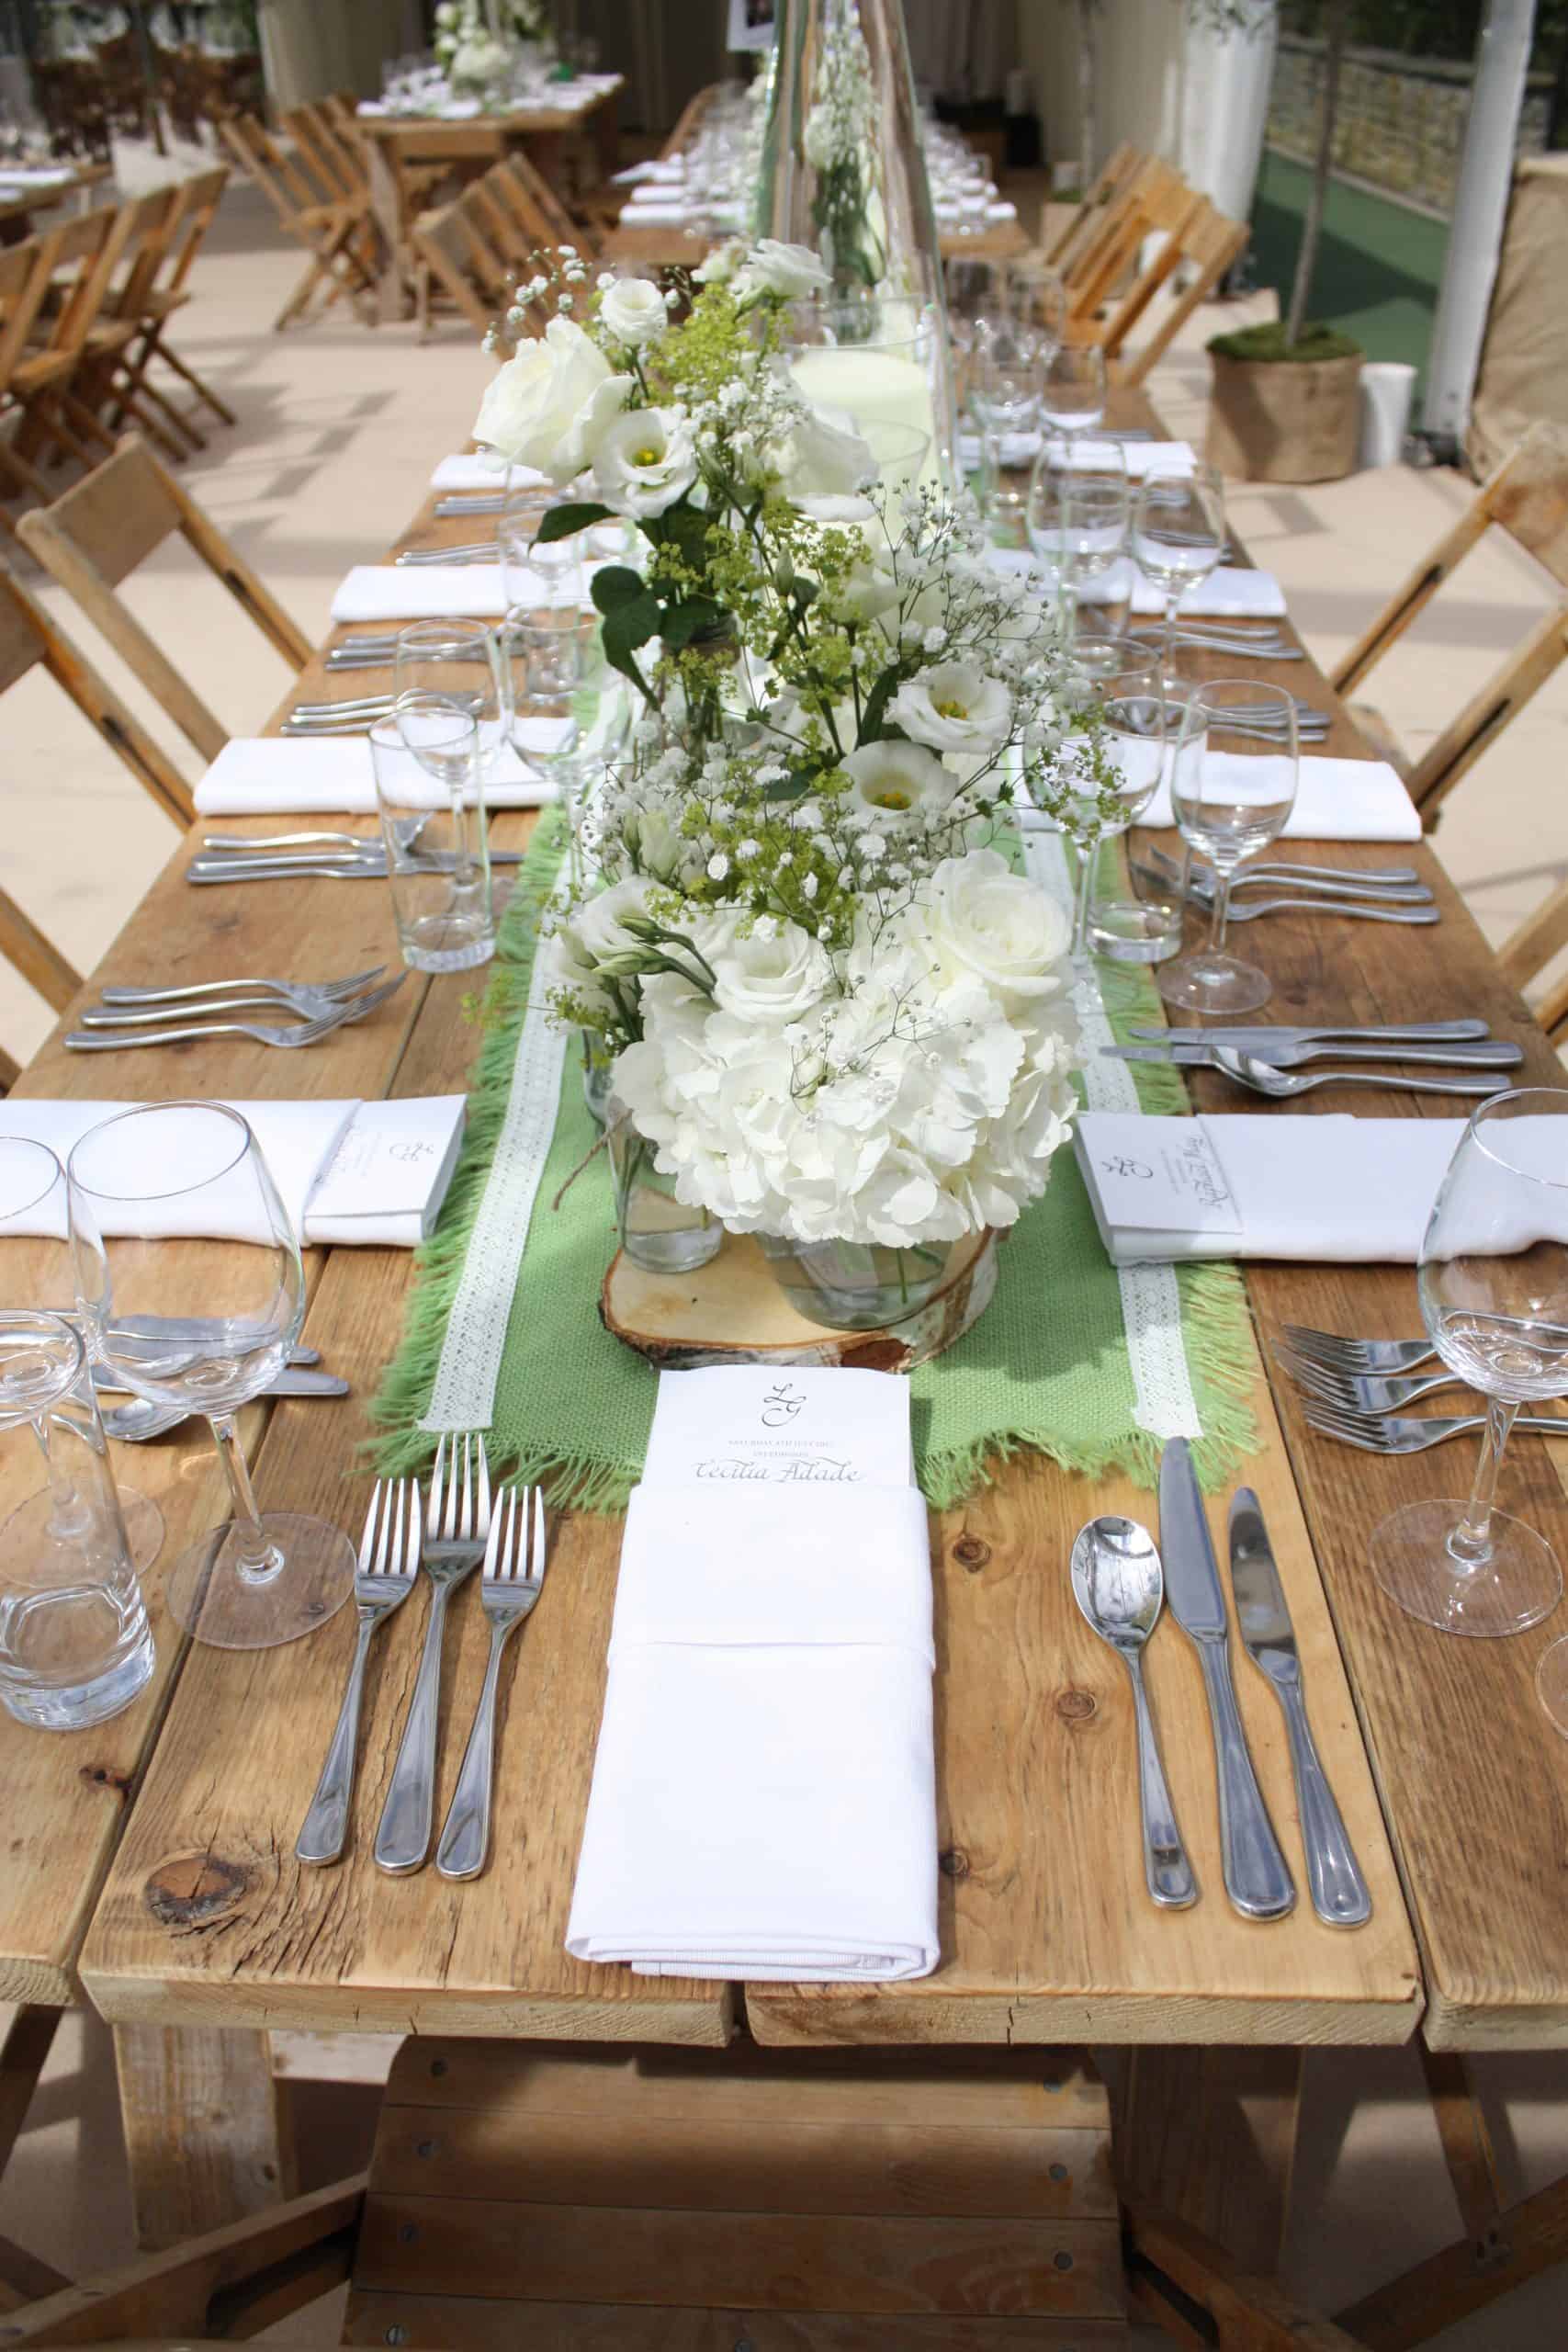 Beautiful Bristol Back Garden Wedding - white floral, green runner, rustic tables centrepieces in marquee